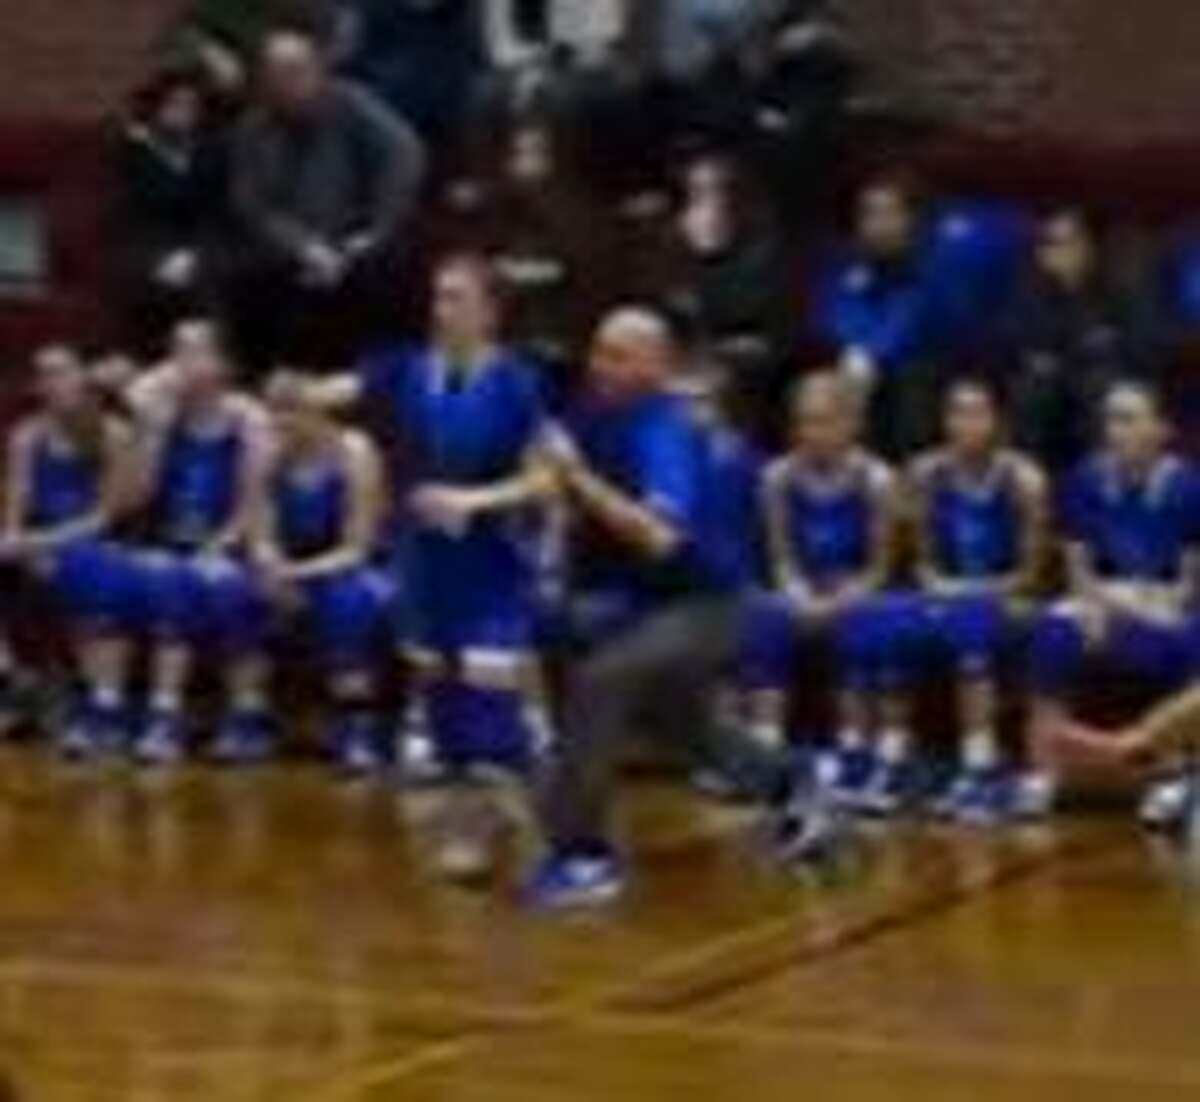 Shaun Russell, the athletic director for East Hampton High School, was placed on leave after he shoved a player during a basketball game last month.